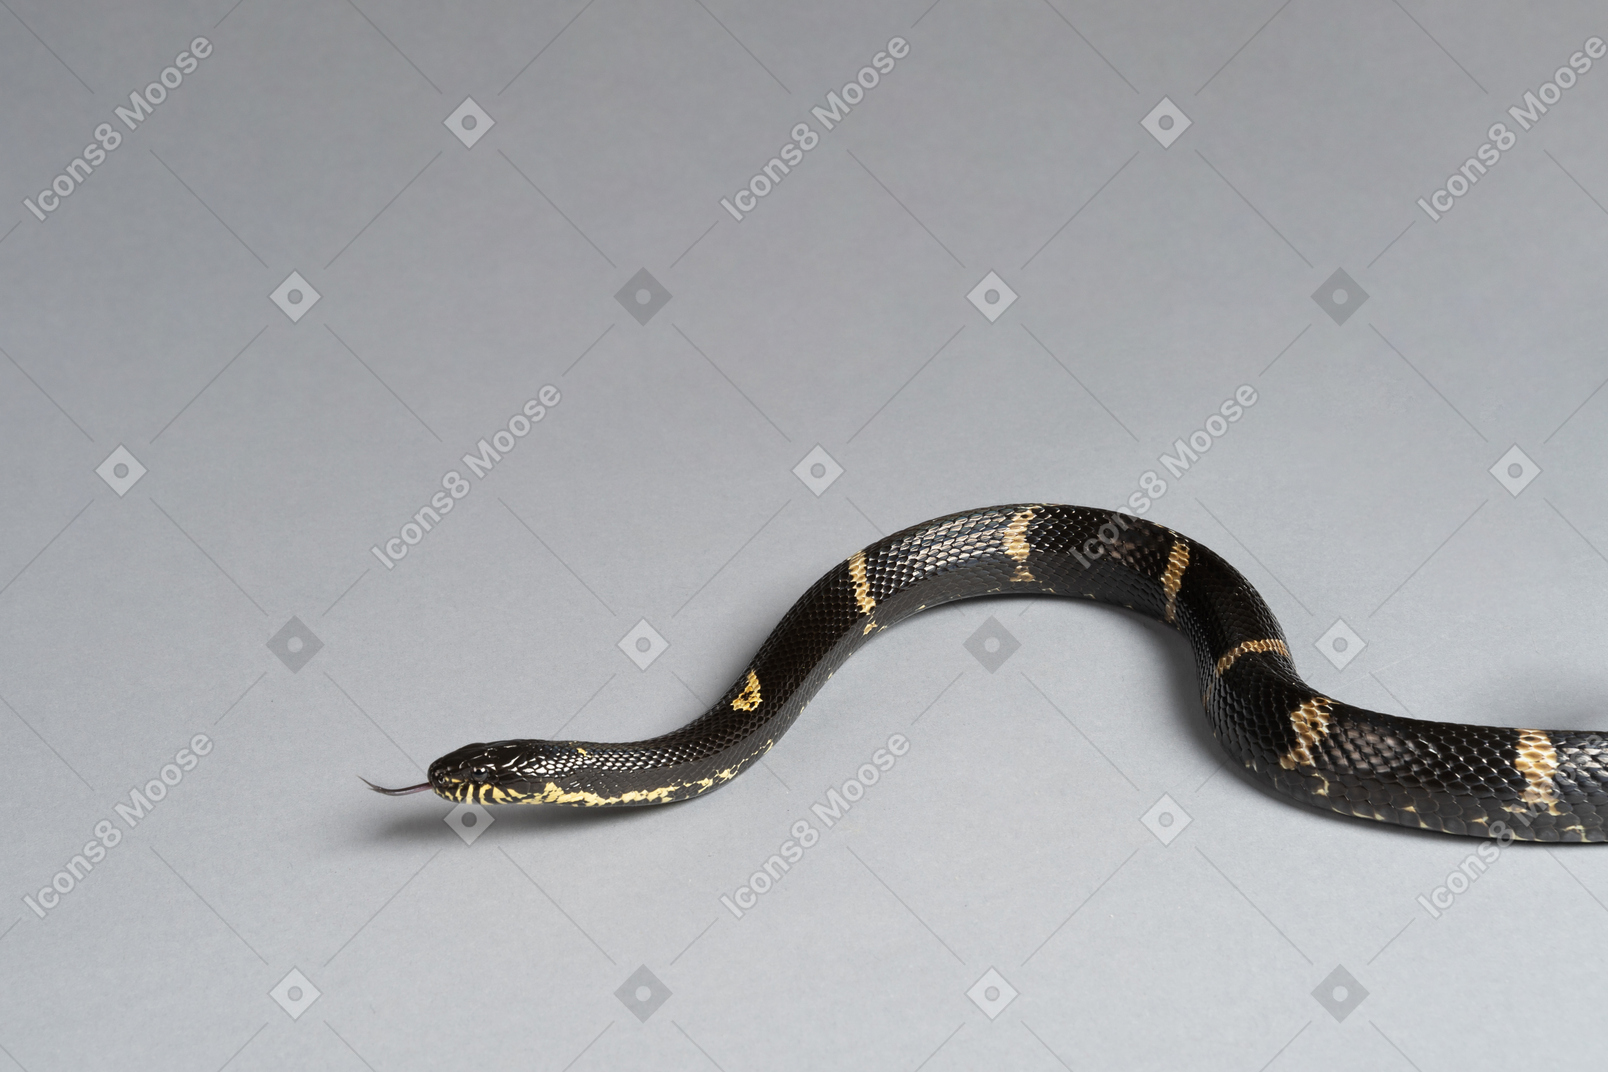 Striped black snake with its tongue out